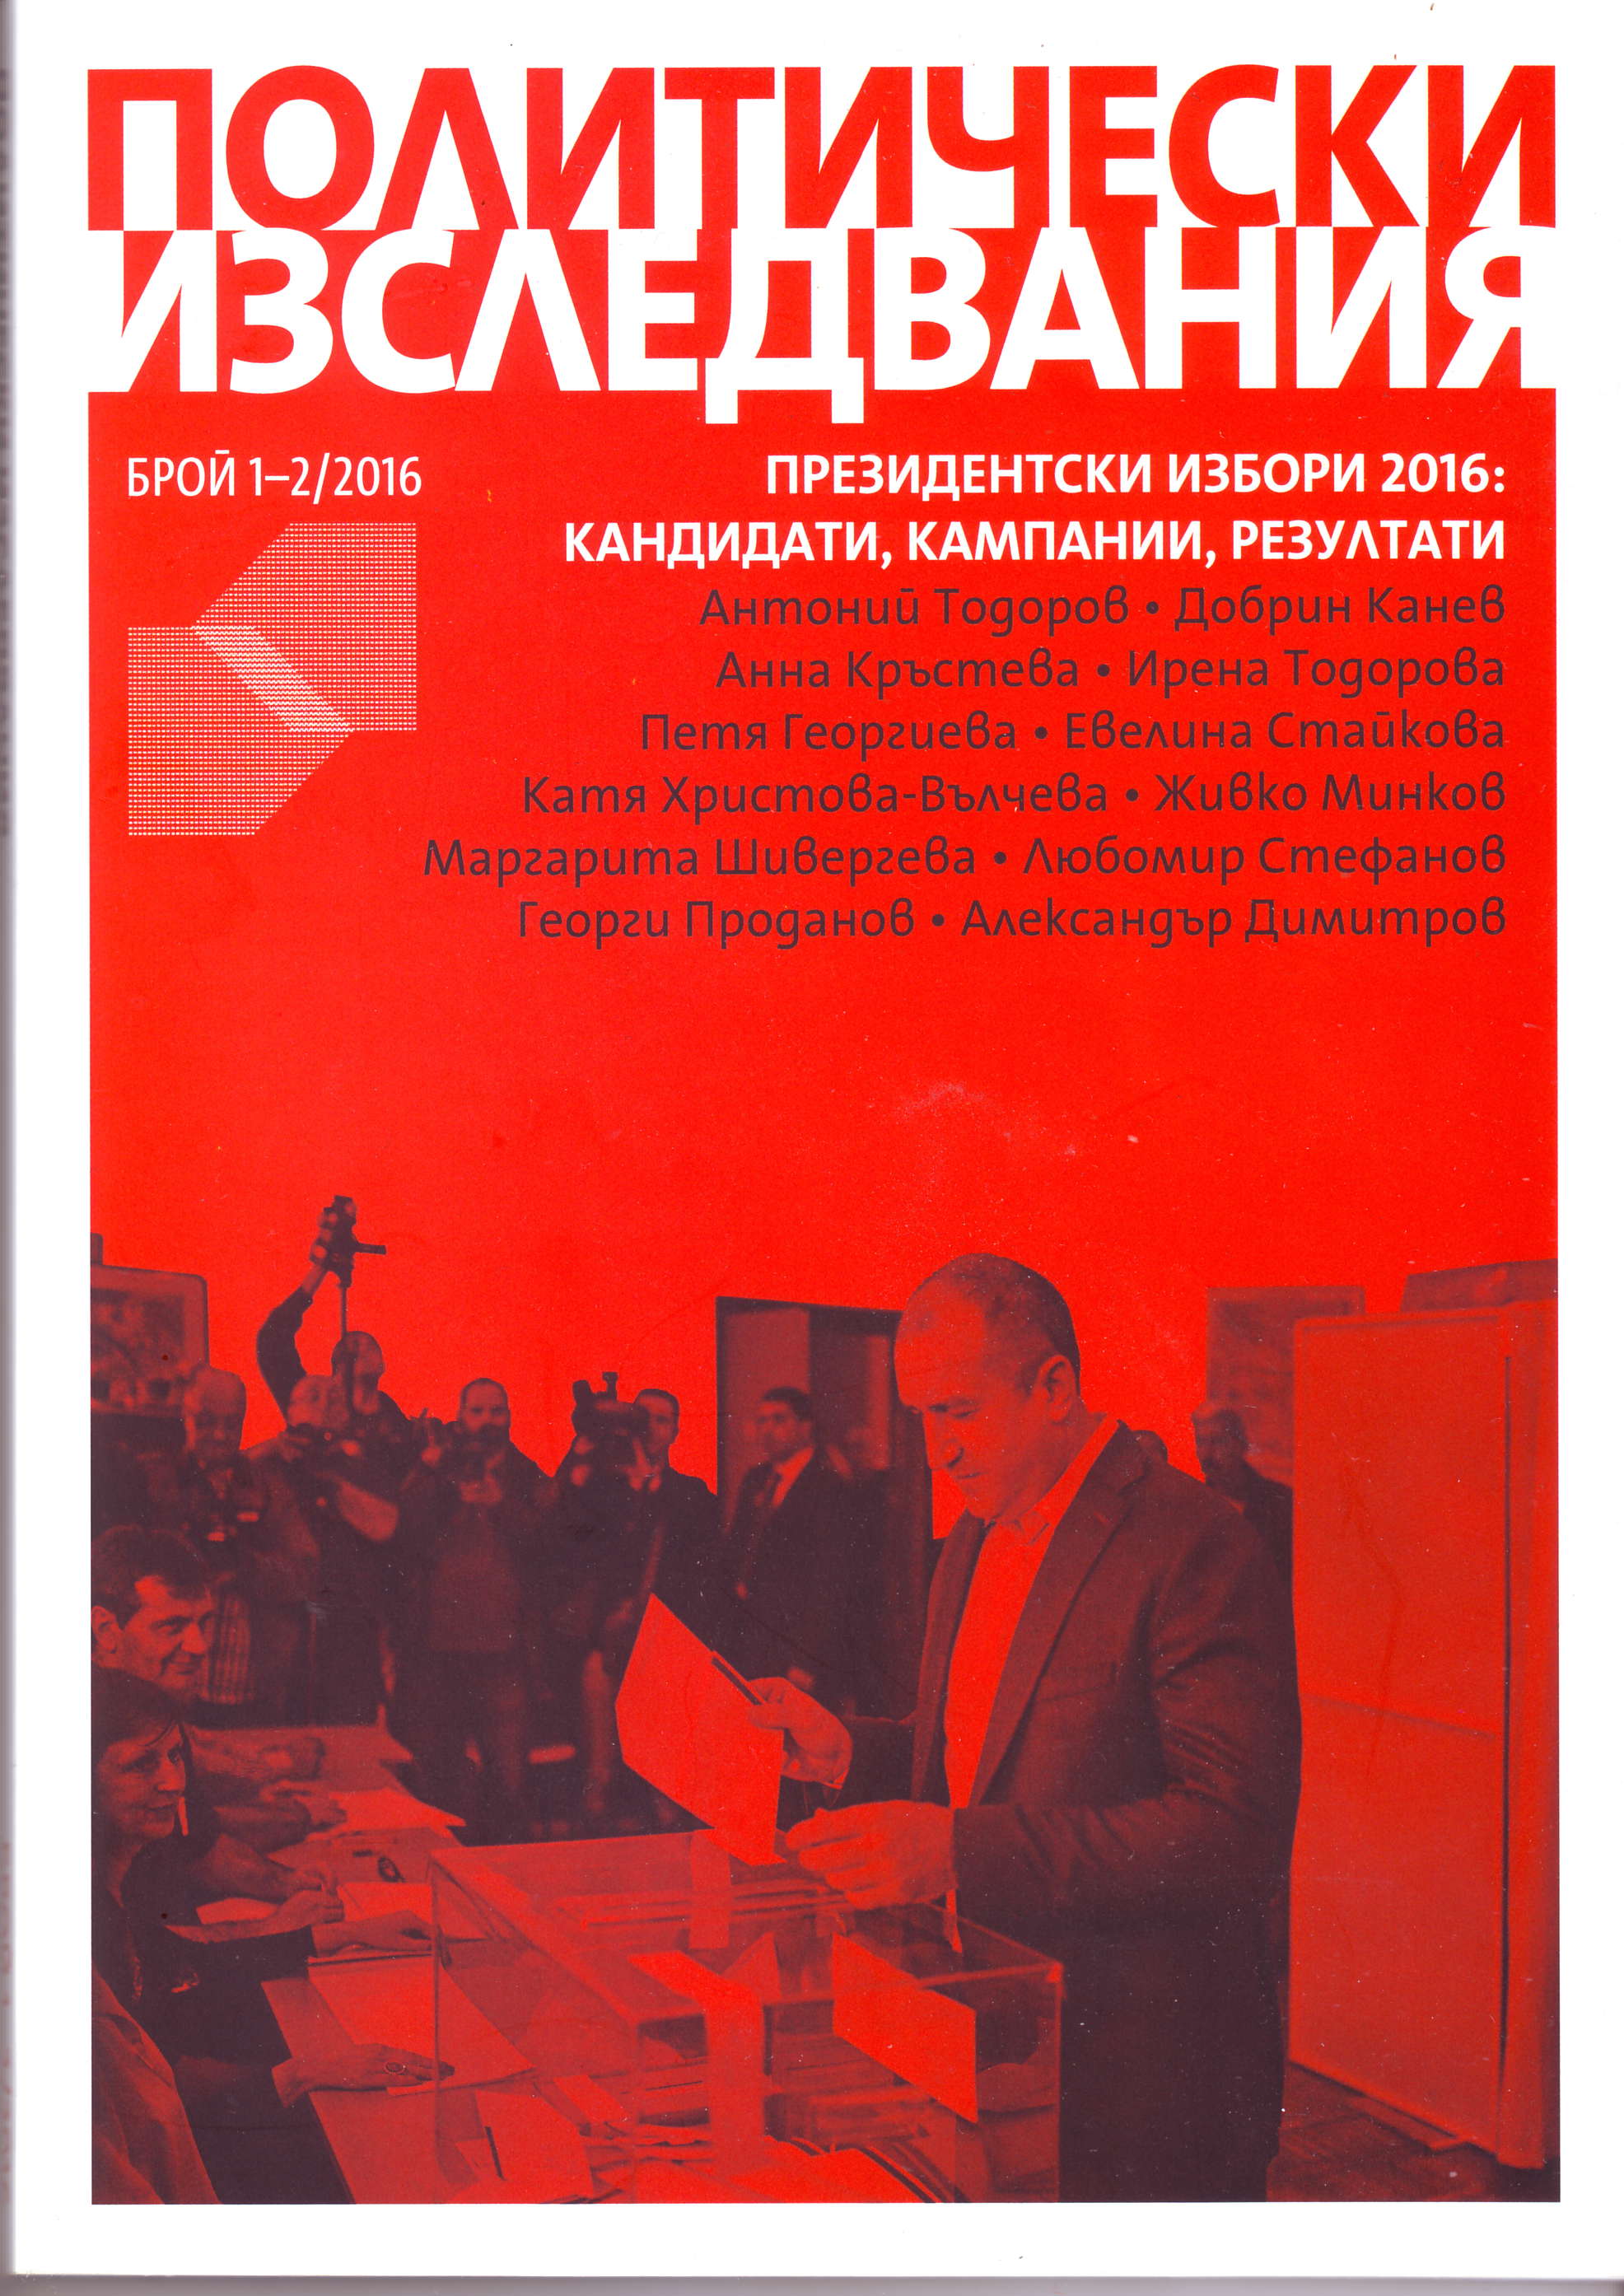 Vice President of the Republic of Bulgaria – a Profoundly Meaningless Post Cover Image